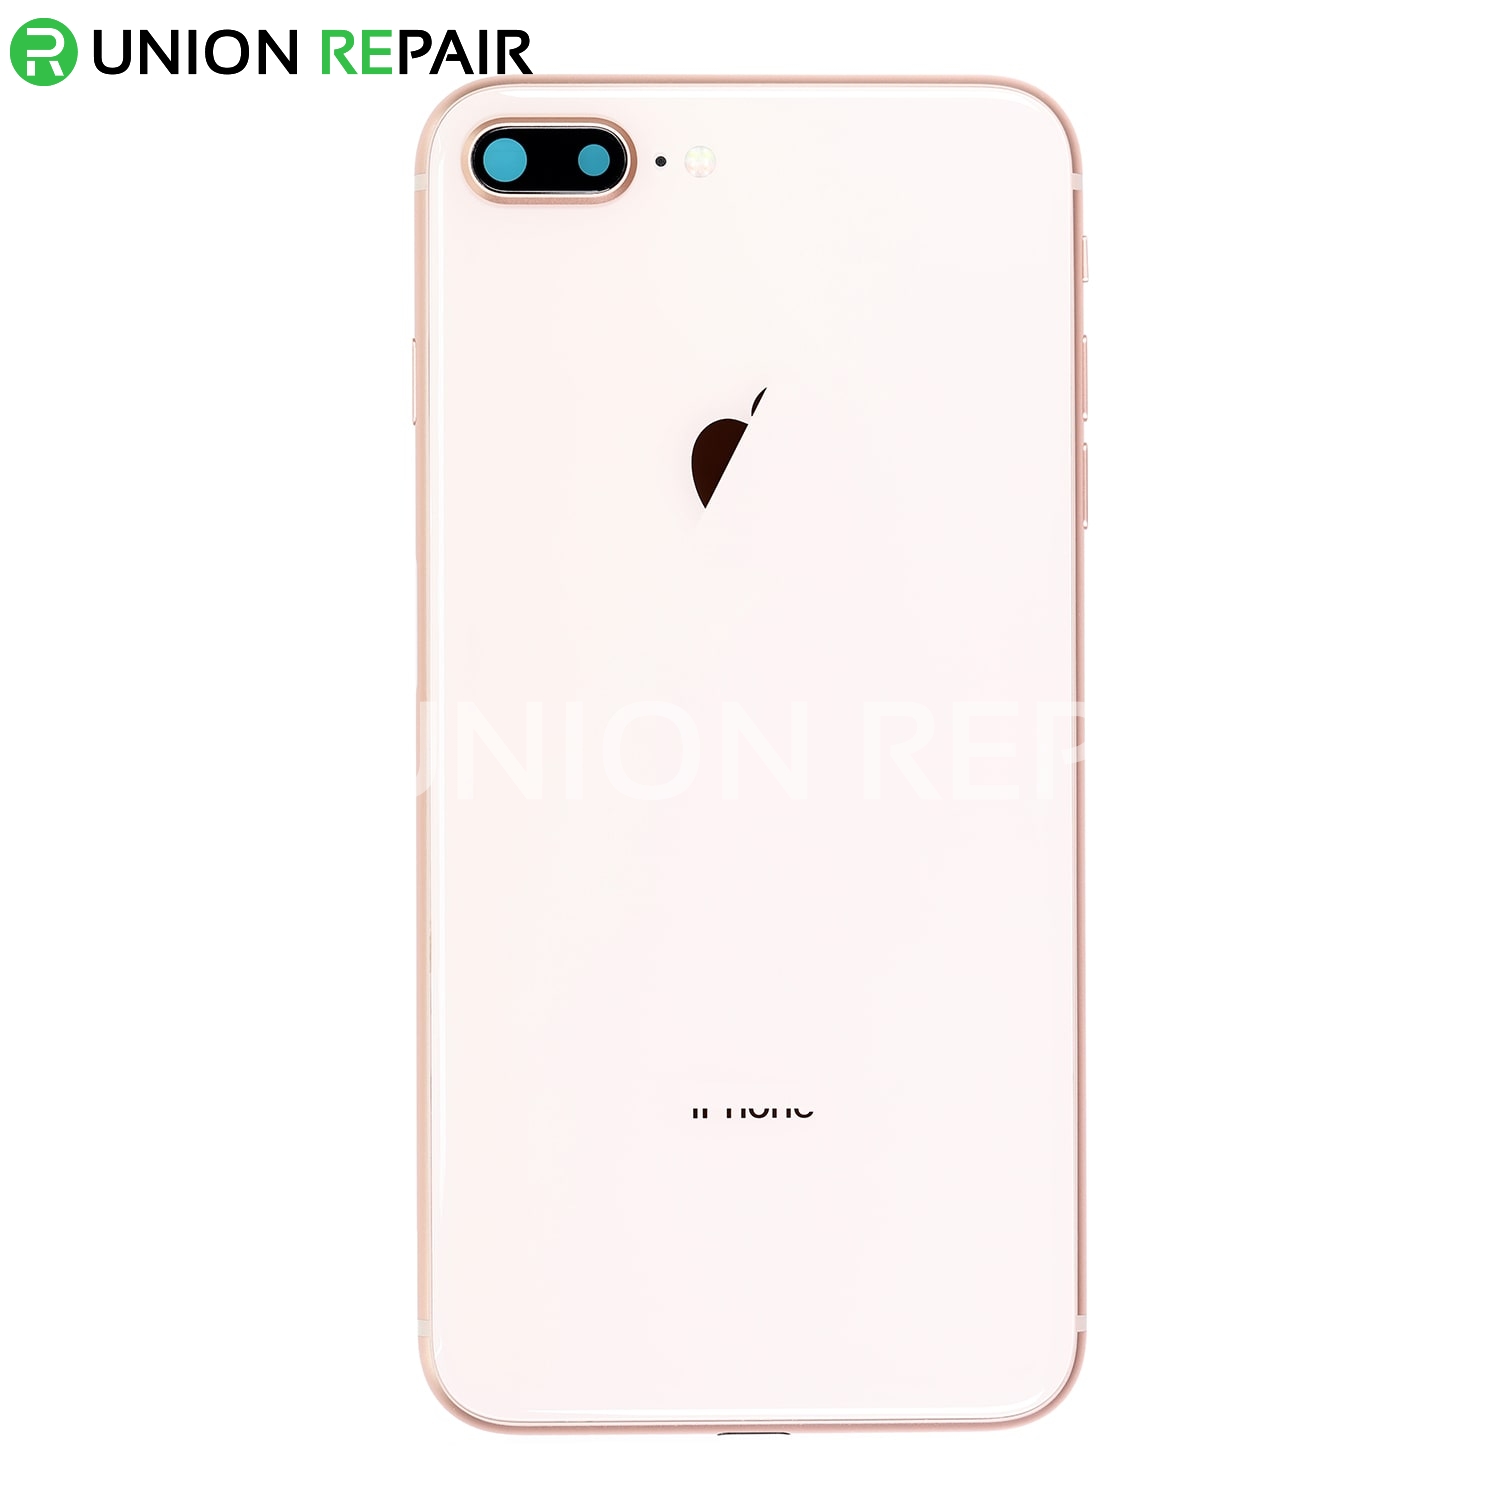 Replacement for iPhone 8 Plus Back Cover Full Assembly - Gold